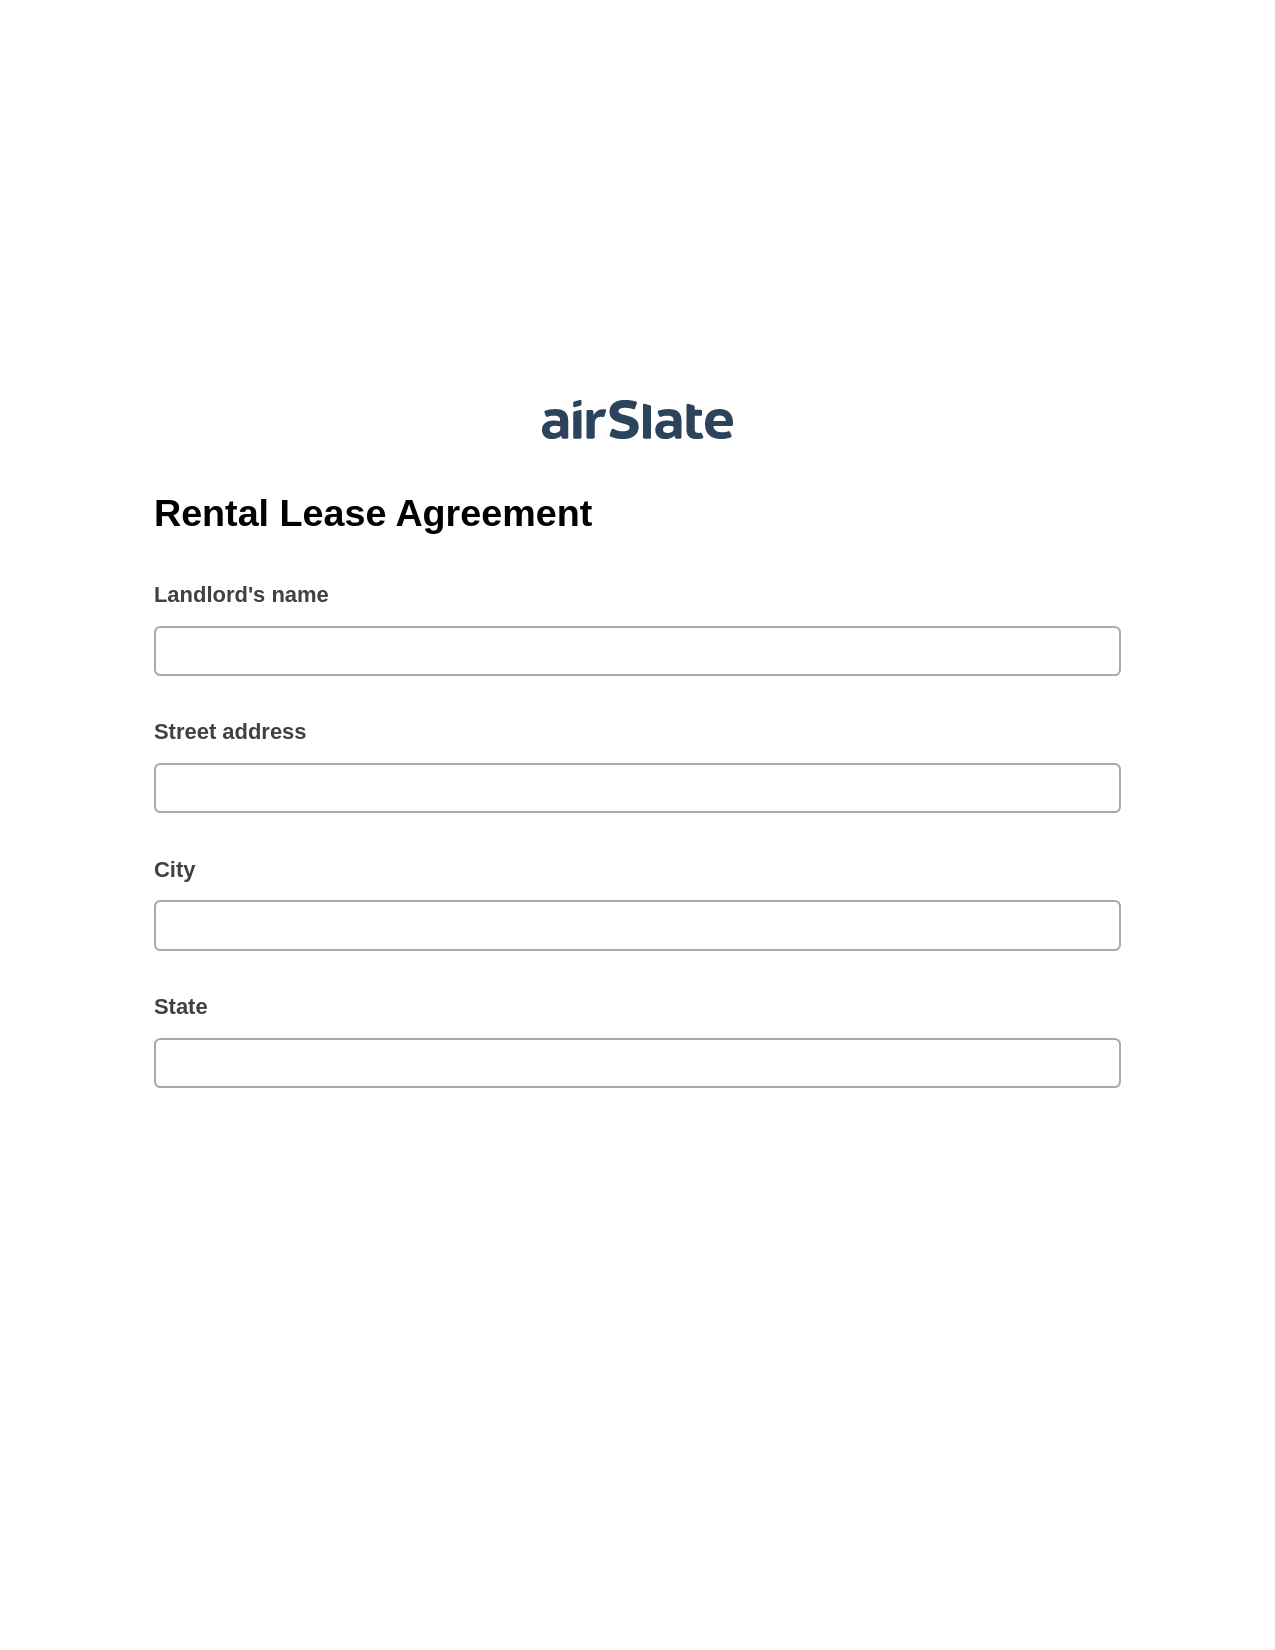 Rental Lease Agreement Pre-fill from NetSuite Records Bot, SendGrid send Campaign bot, Box Bot